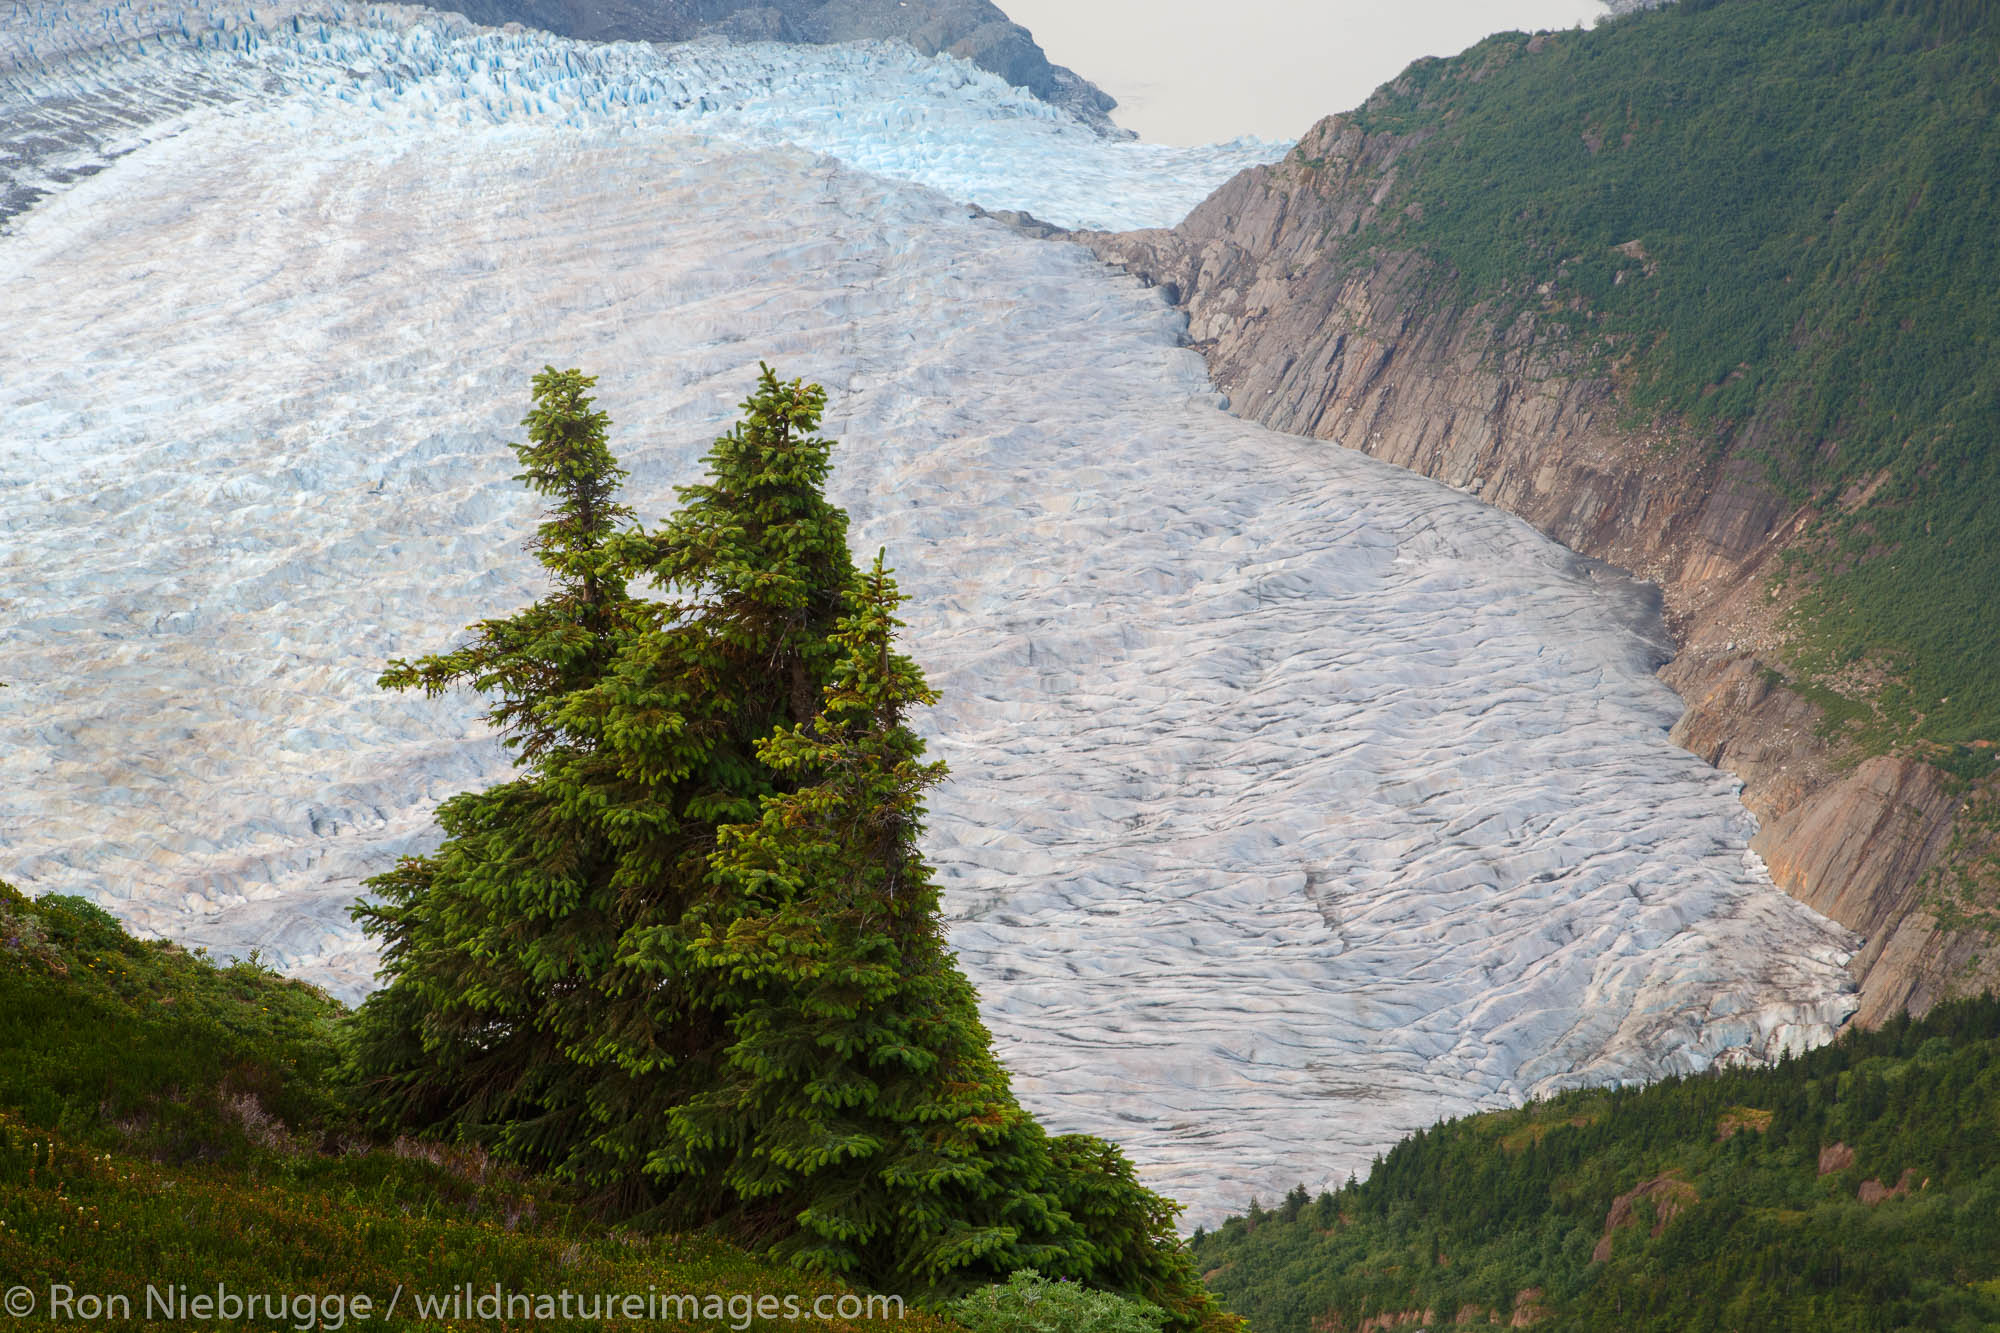 From Mount Stroller White above the Mendenhall Glacier, Tongass National Forest, Alaska